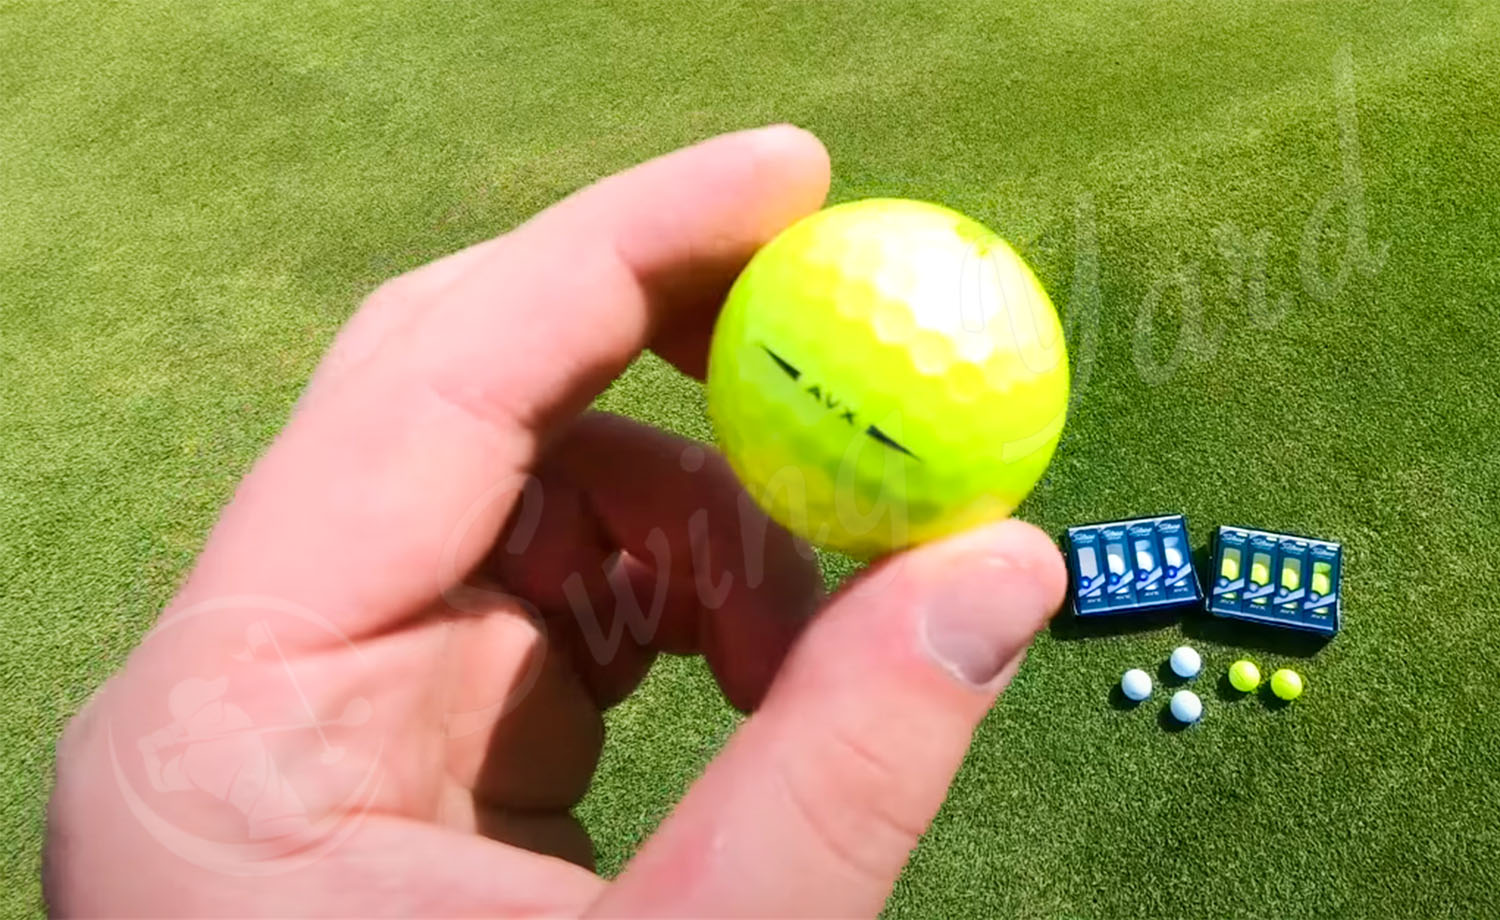 Me holding the yellow Titleist AVX golf ball at the golf course